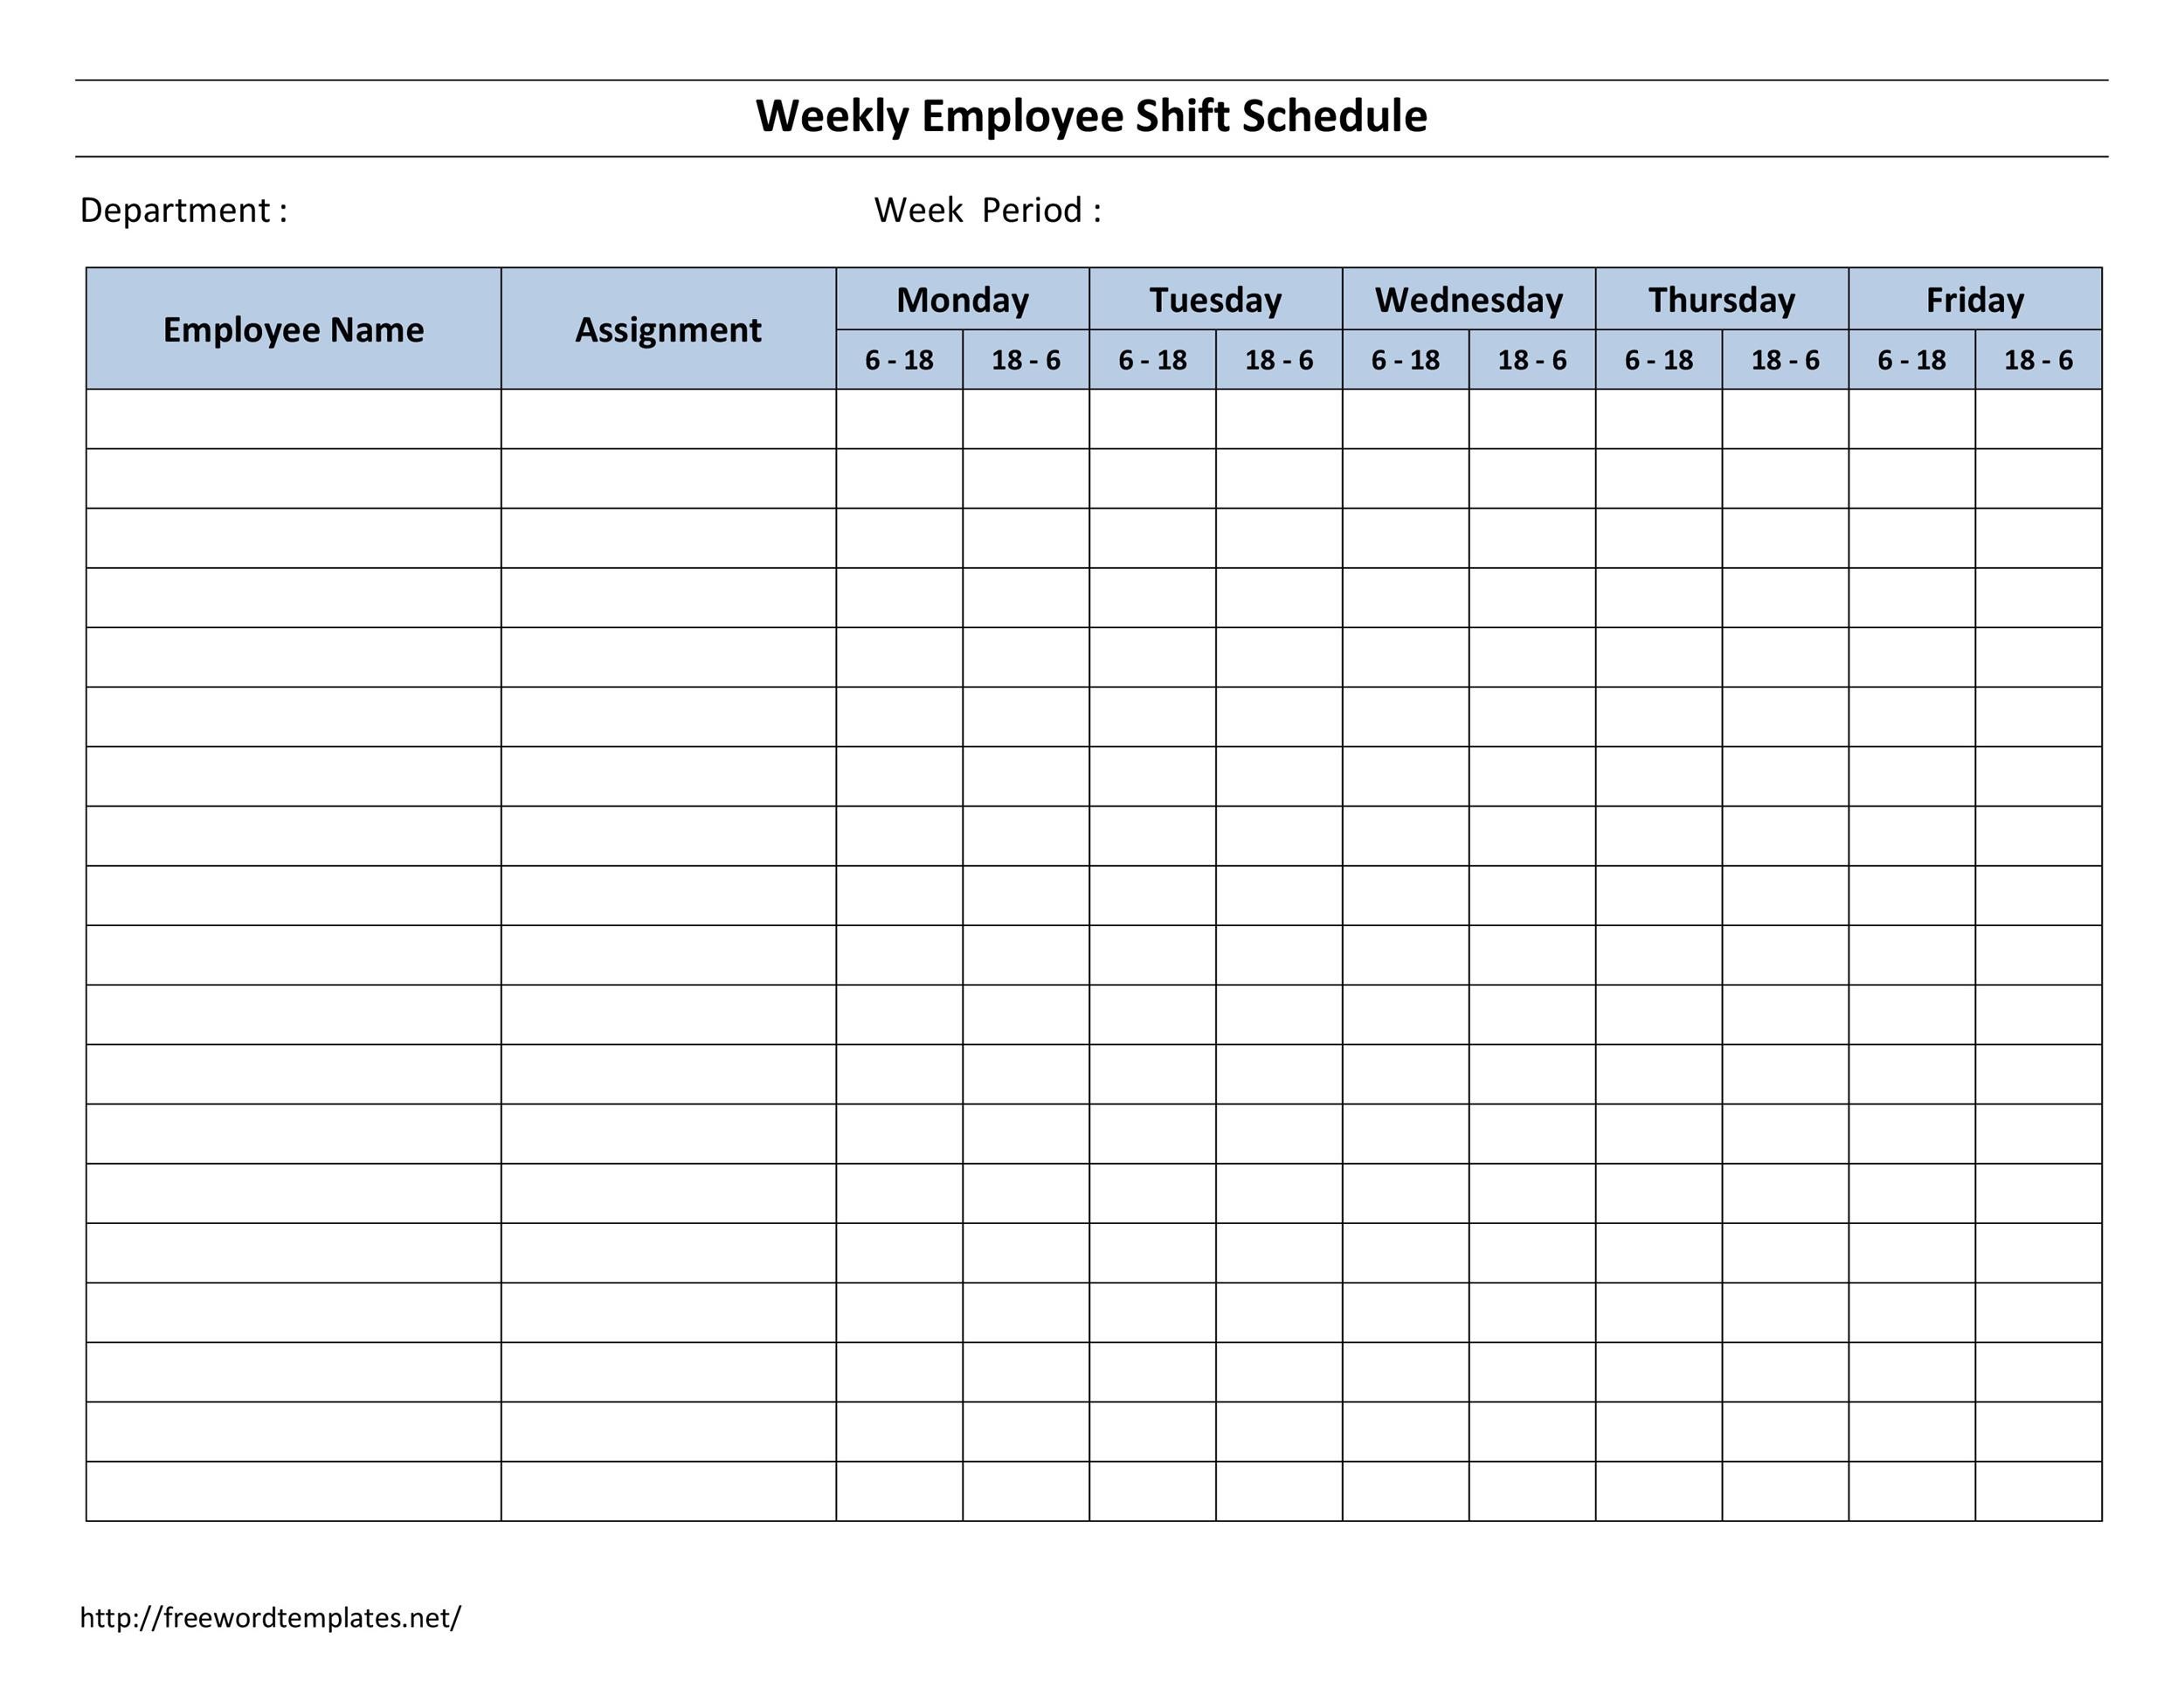 14 Dupont Shift Schedule Templats for any Company [Free] ᐅ TemplateLab